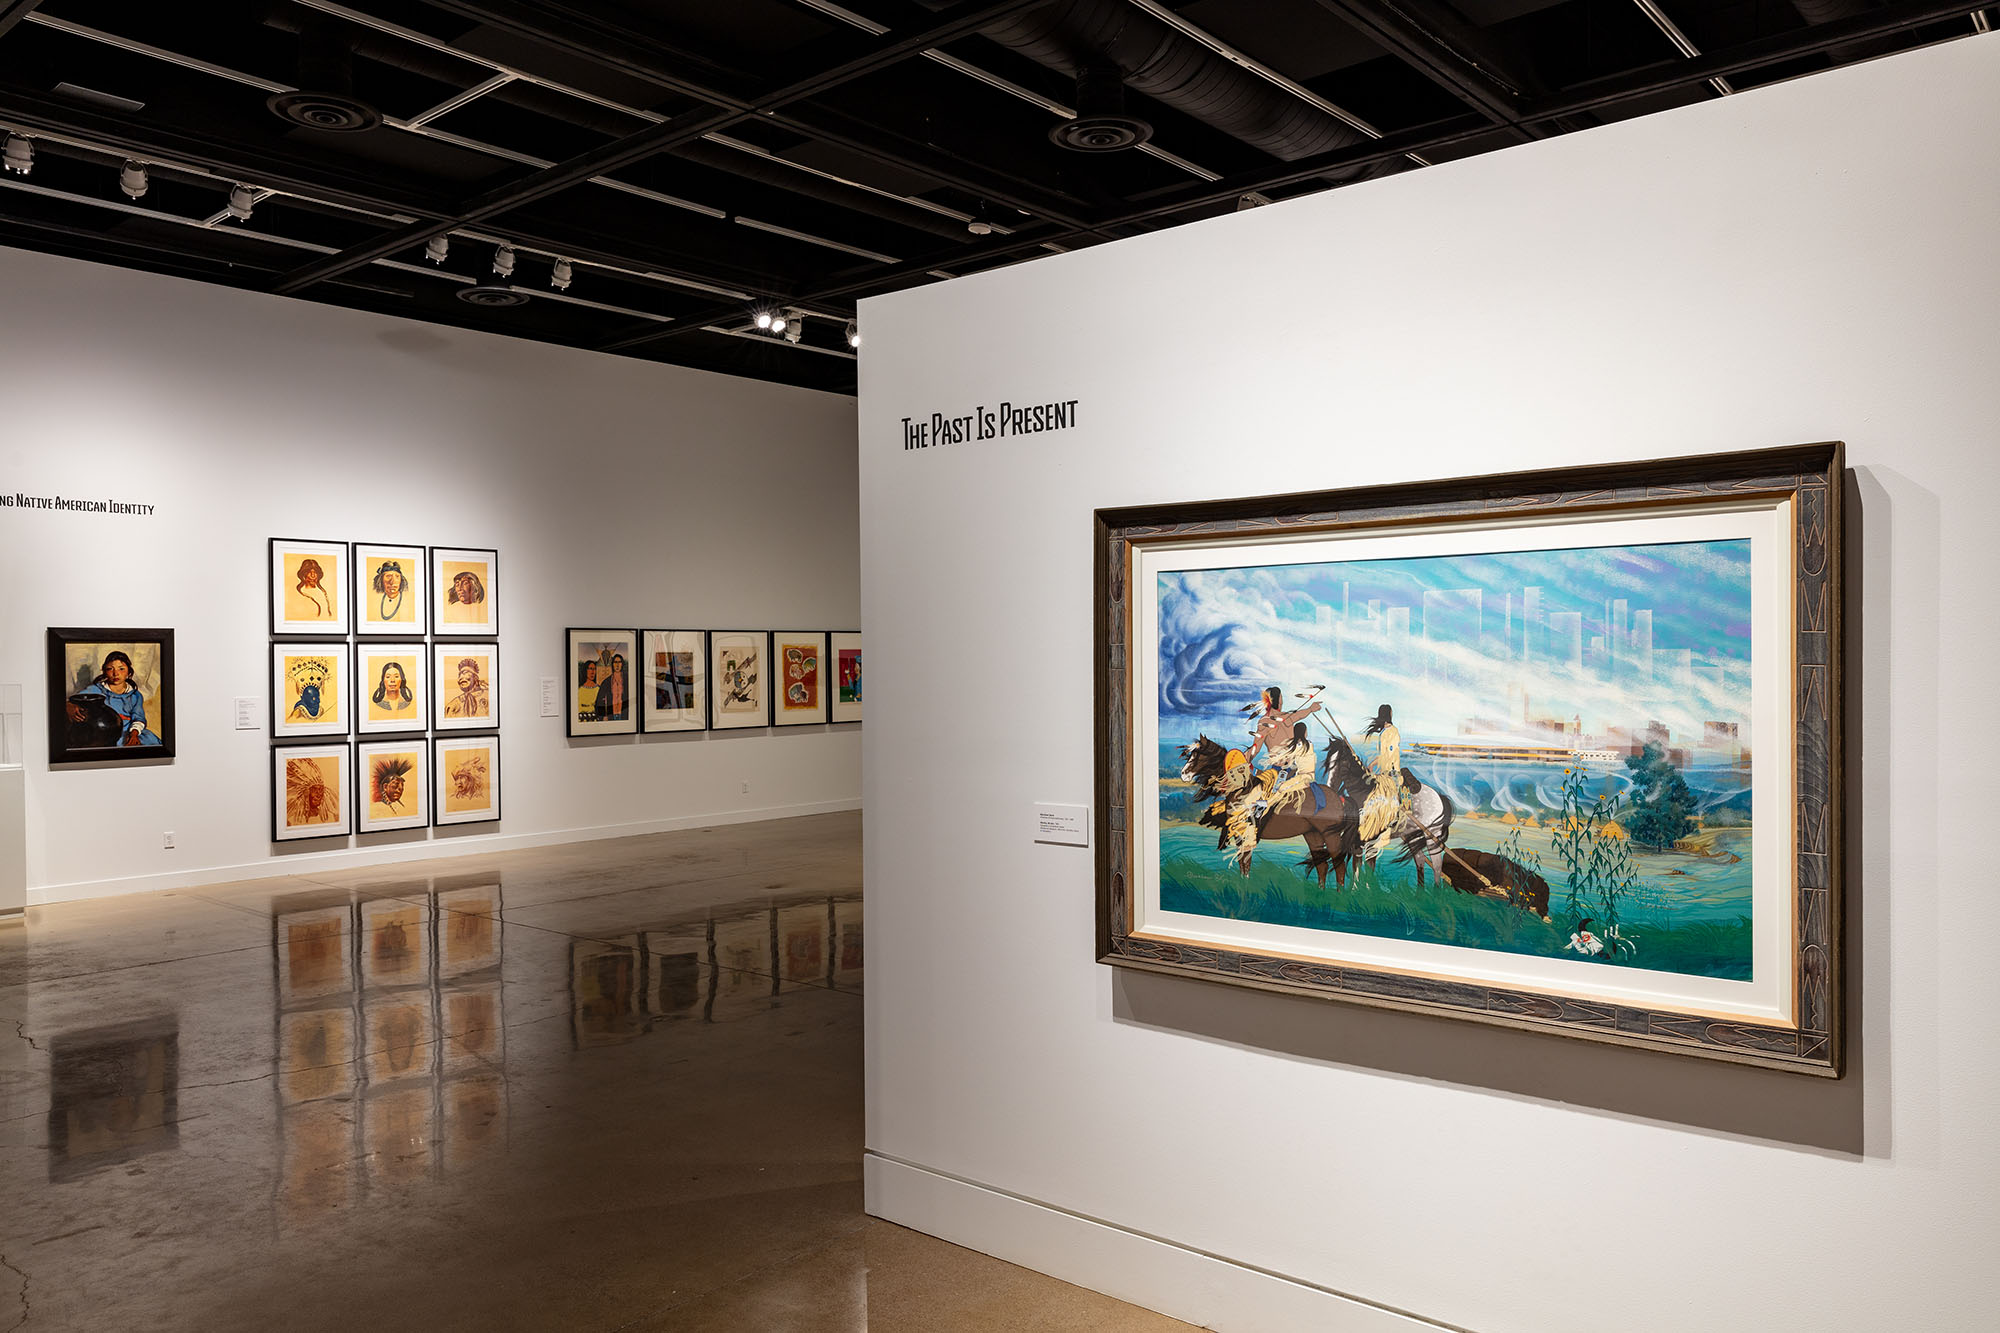 Myths of the West: Narrating Stories of the Land and People Through Wichita Art Collections